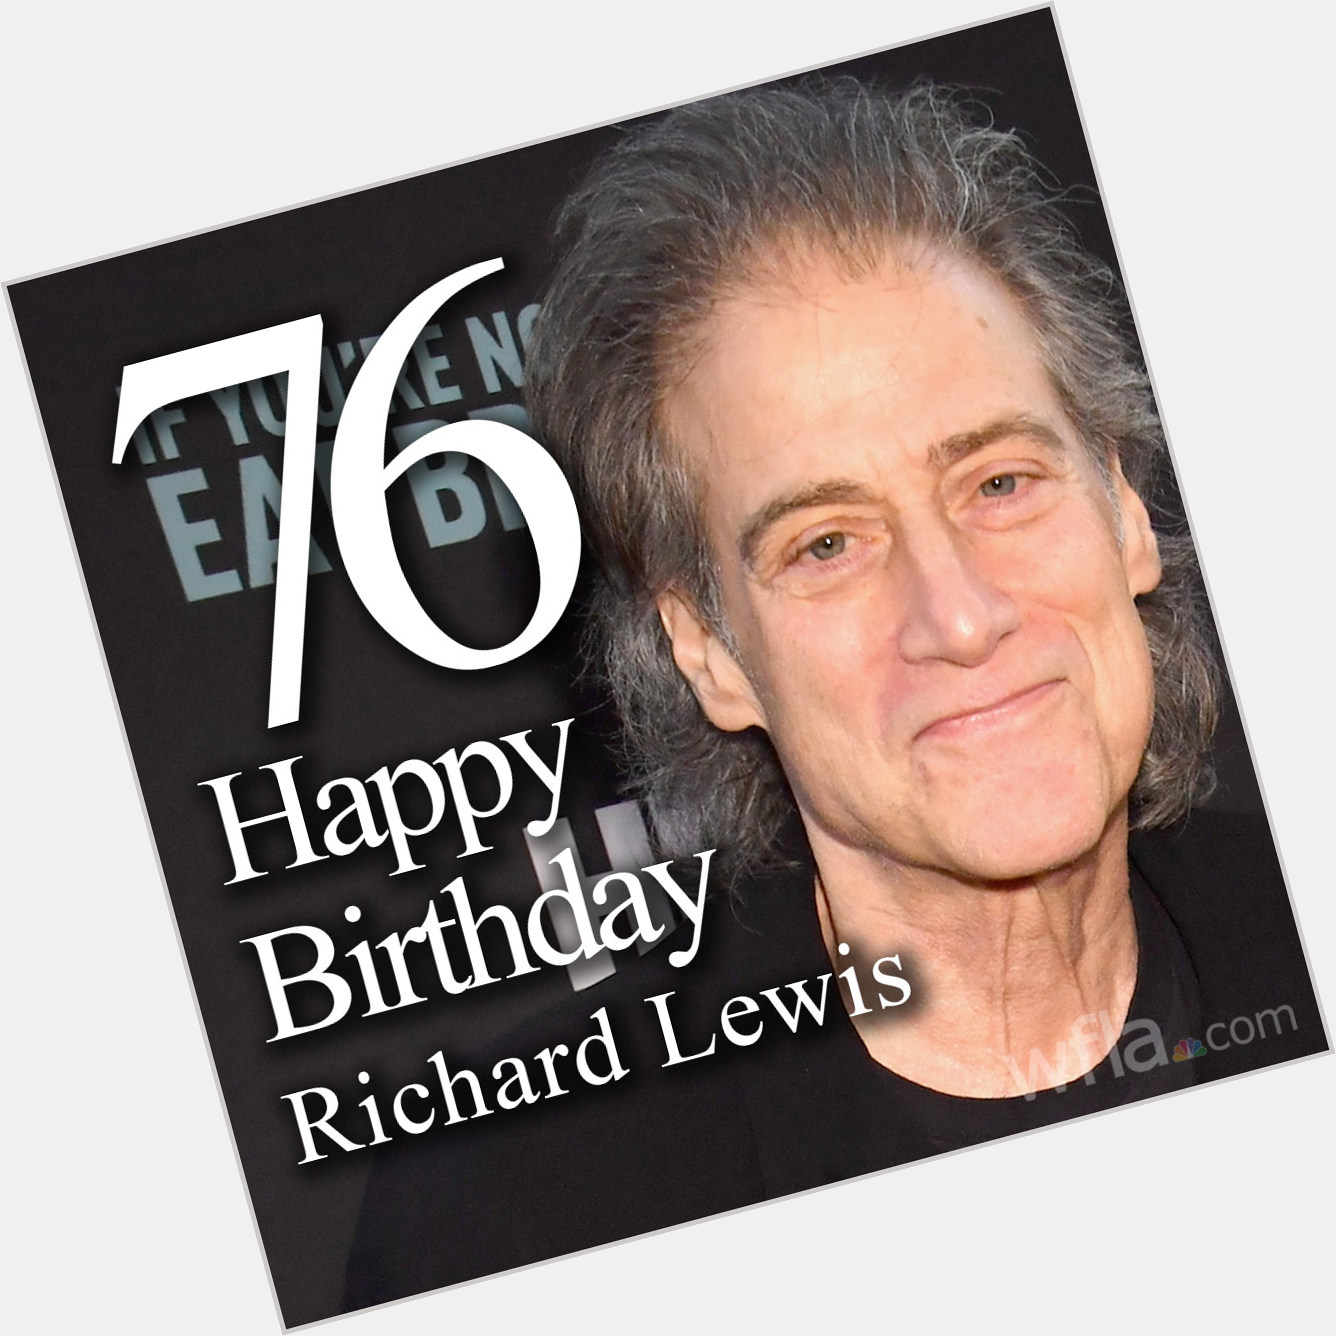 HAPPY BIRTHDAY!!  Actor and comedian Richard Lewis is celebrating his 76th birthday today!  